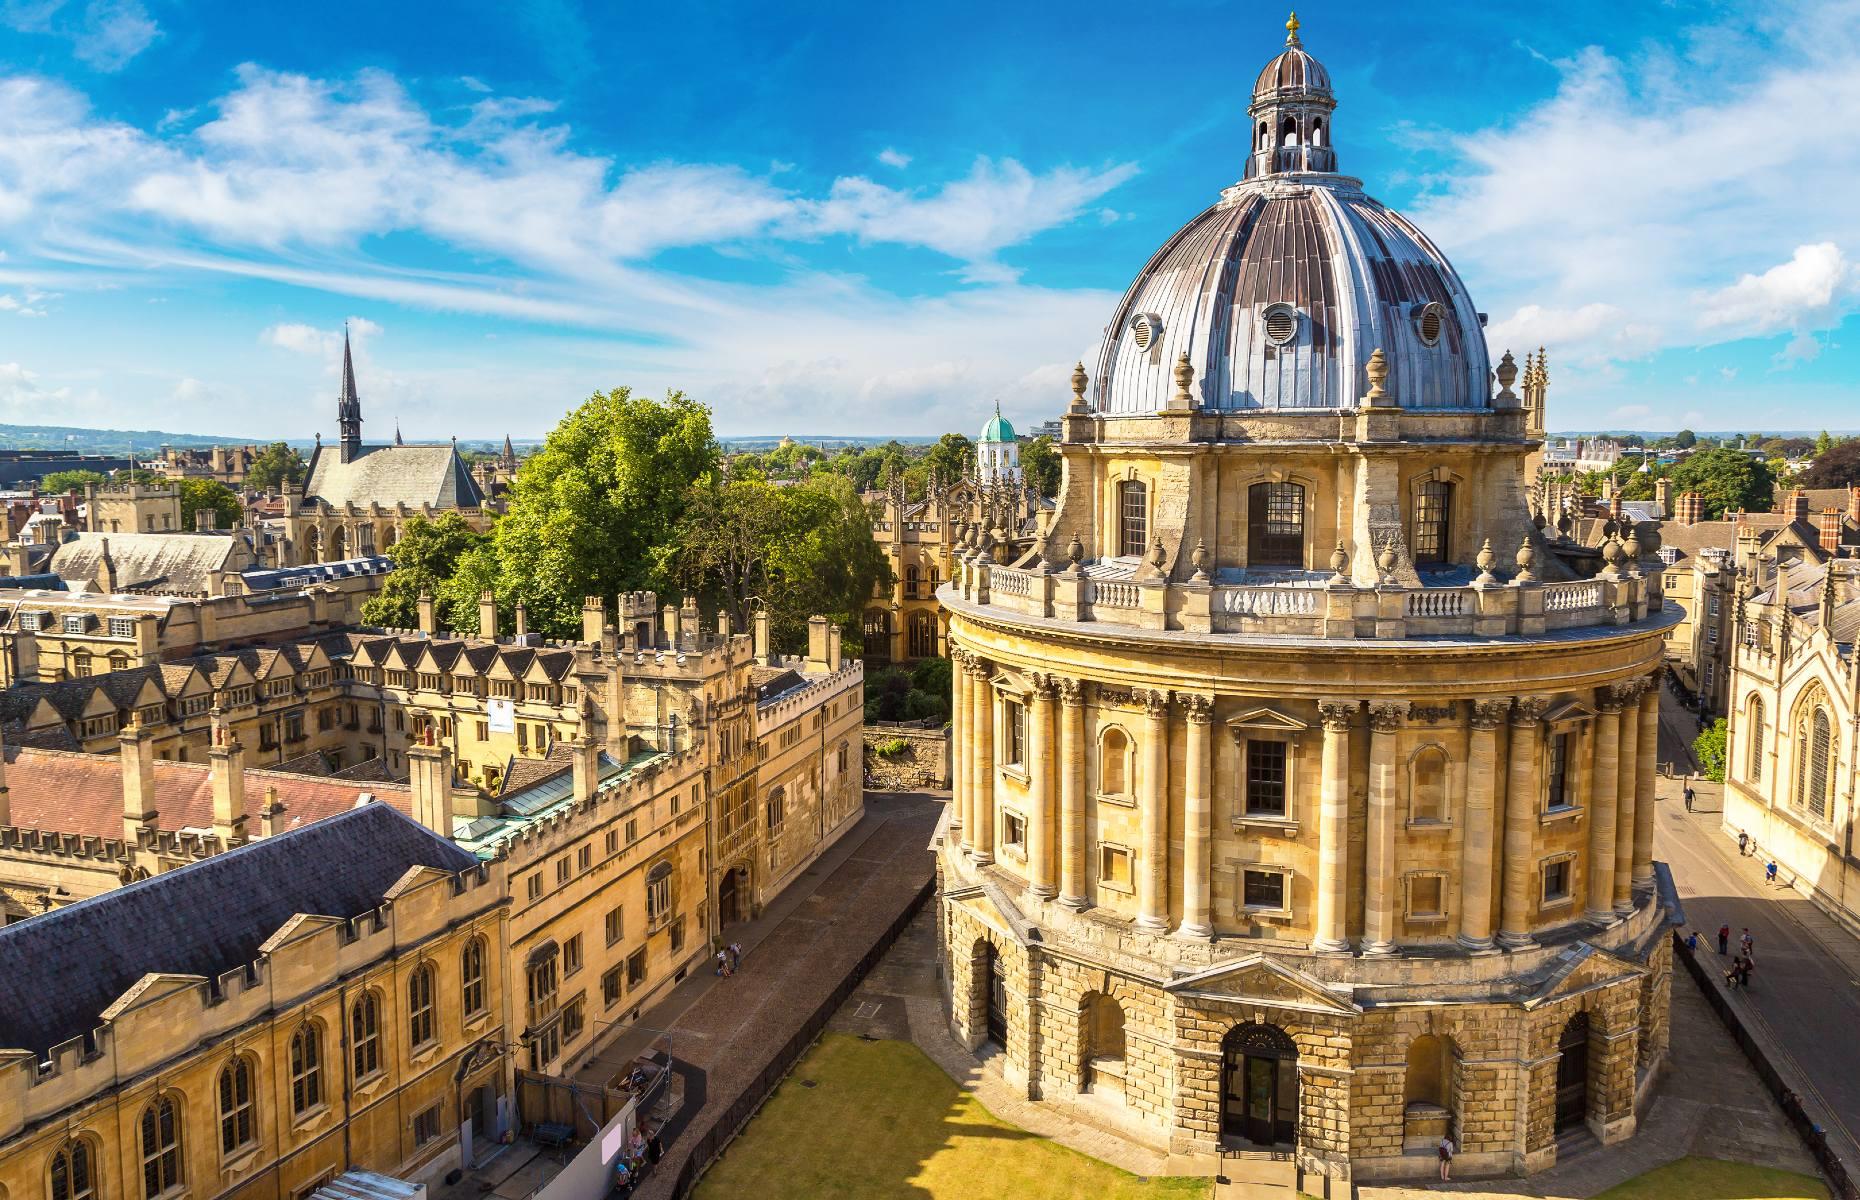 <p><a href="http://www.loveexploring.com/news/72568/the-top-things-to-do-in-oxford-attractions">Oxford</a> is a city hailed for its beautiful historic buildings, but none are quite like the striking dome-shaped building of Radcliffe Camera. Built between 1737 and 1749, it was designed by architect James Gibbs as a new scientific library and was the first circular library in England. The building was named after the royal physician Dr John Radcliffe and ‘camera’ which translates to ‘chamber’ in Latin. Considered ‘the heart of Oxford’, Radcliffe Camera is now the main reading room of the Bodleian Library and is one of the city’s most beautiful buildings.</p>